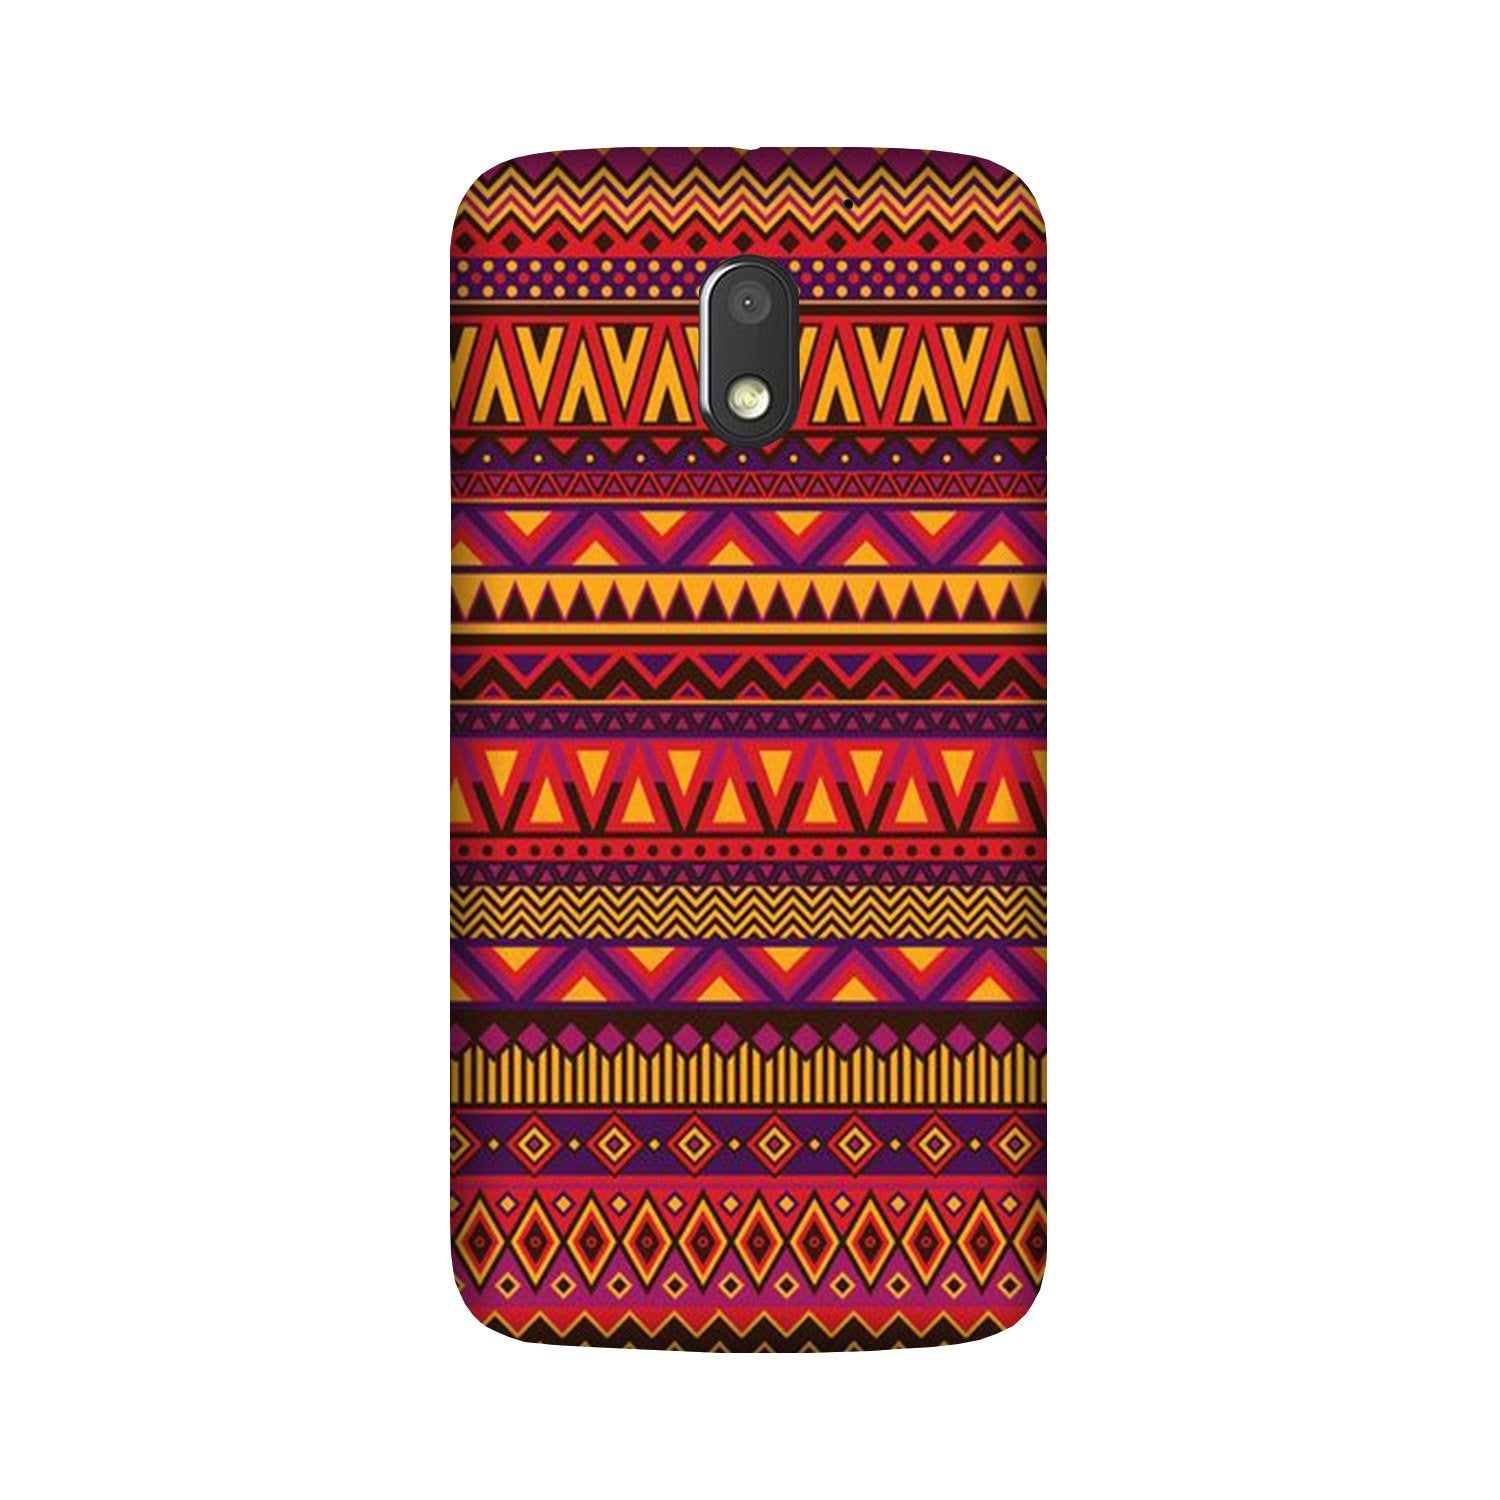 Zigzag line pattern2 Case for Moto G4 Play